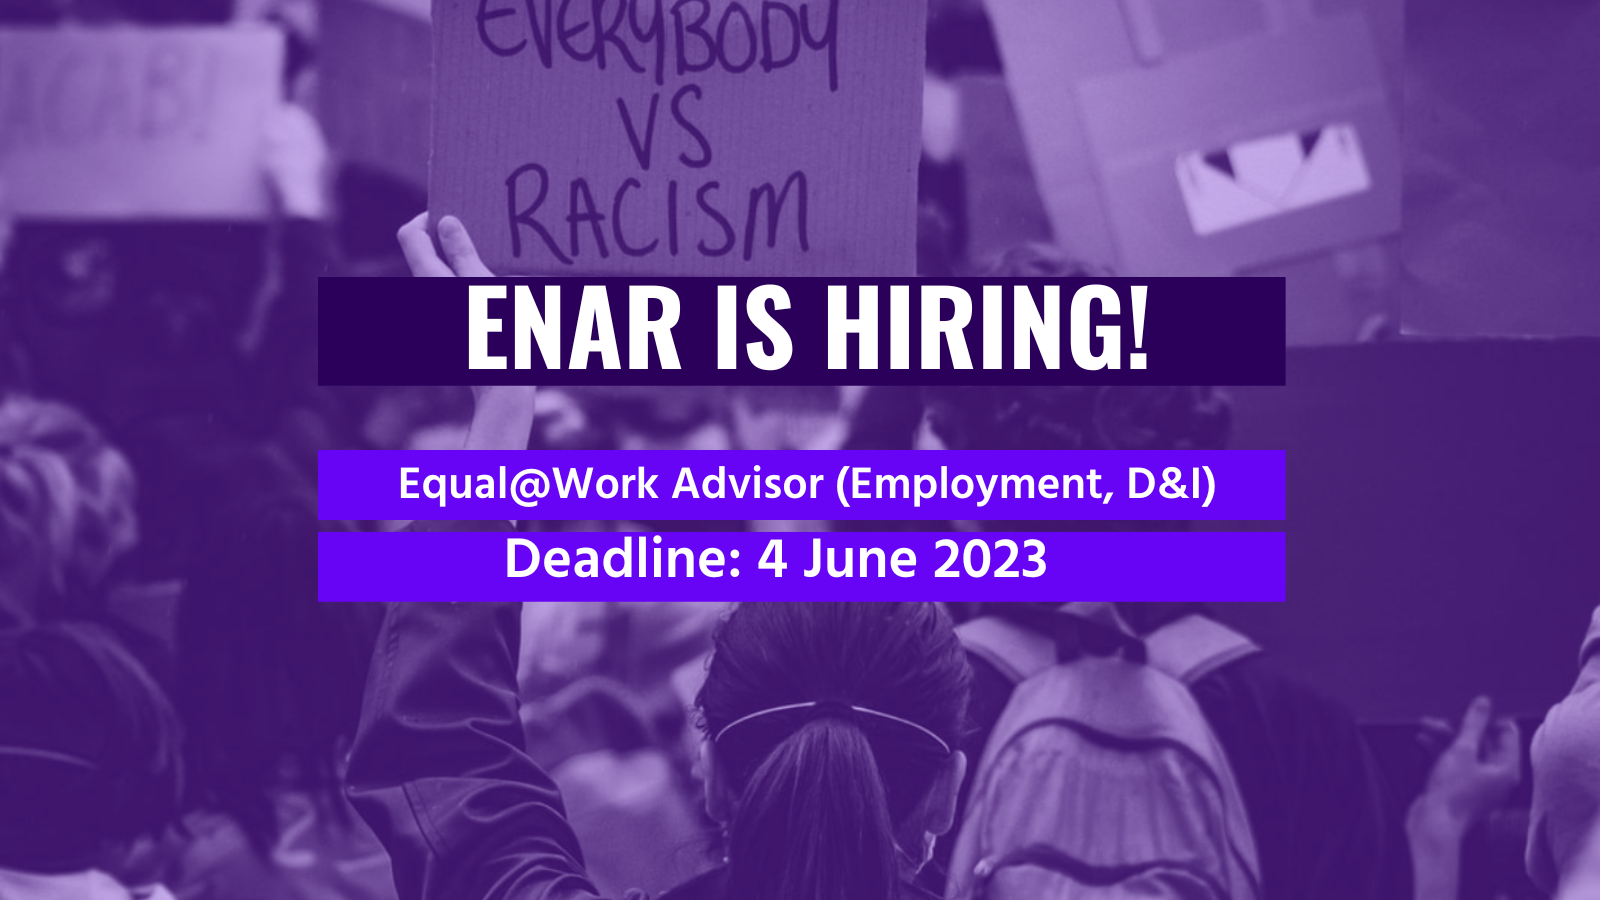 Policy and Advocacy Advisor Employment, Diversity & Inclusion, Equal@Work, ENAR